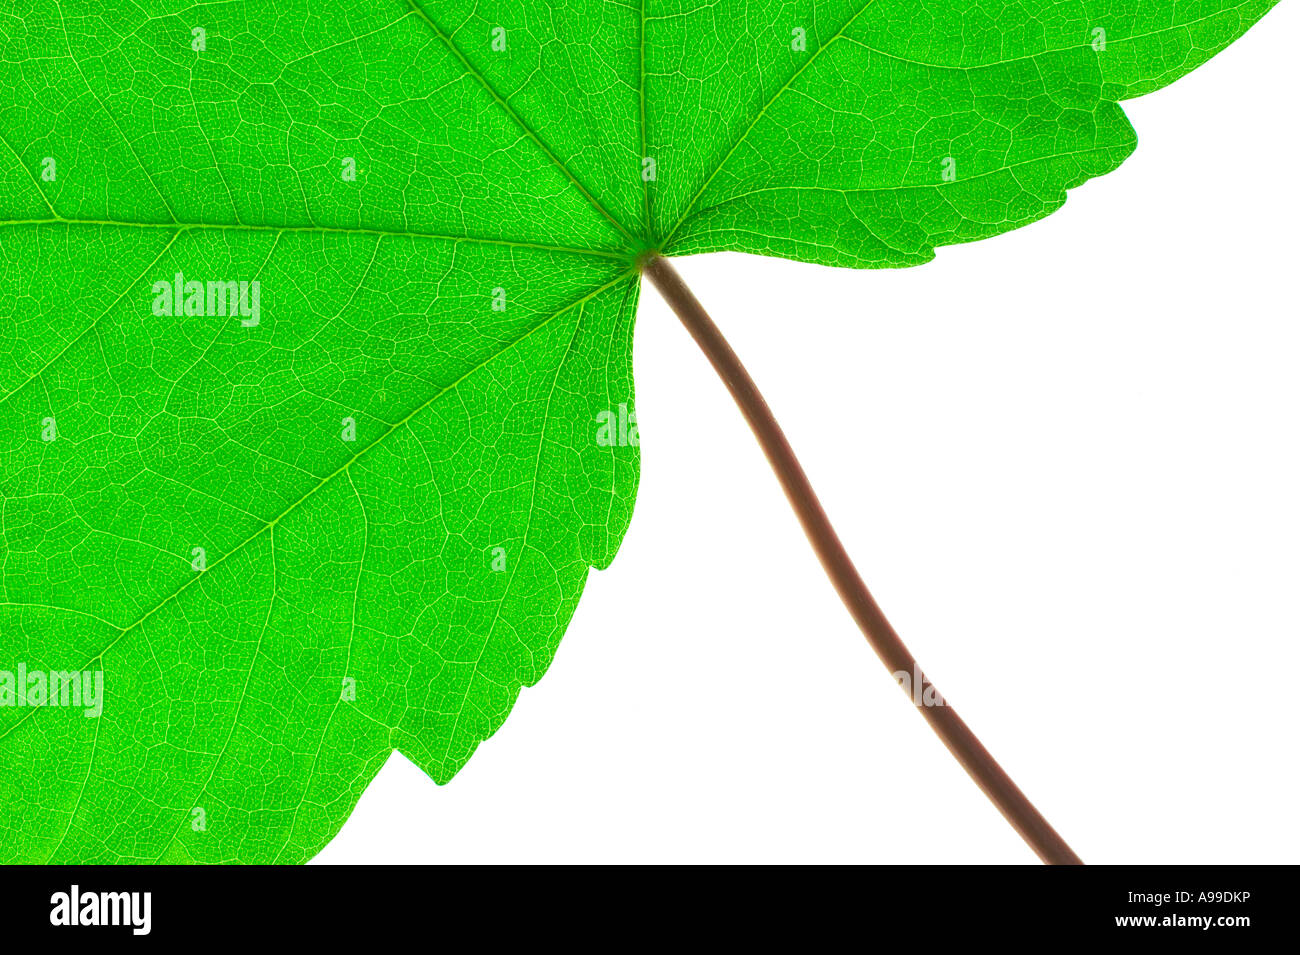 Green leaf and stem macro against a white background Stock Photo